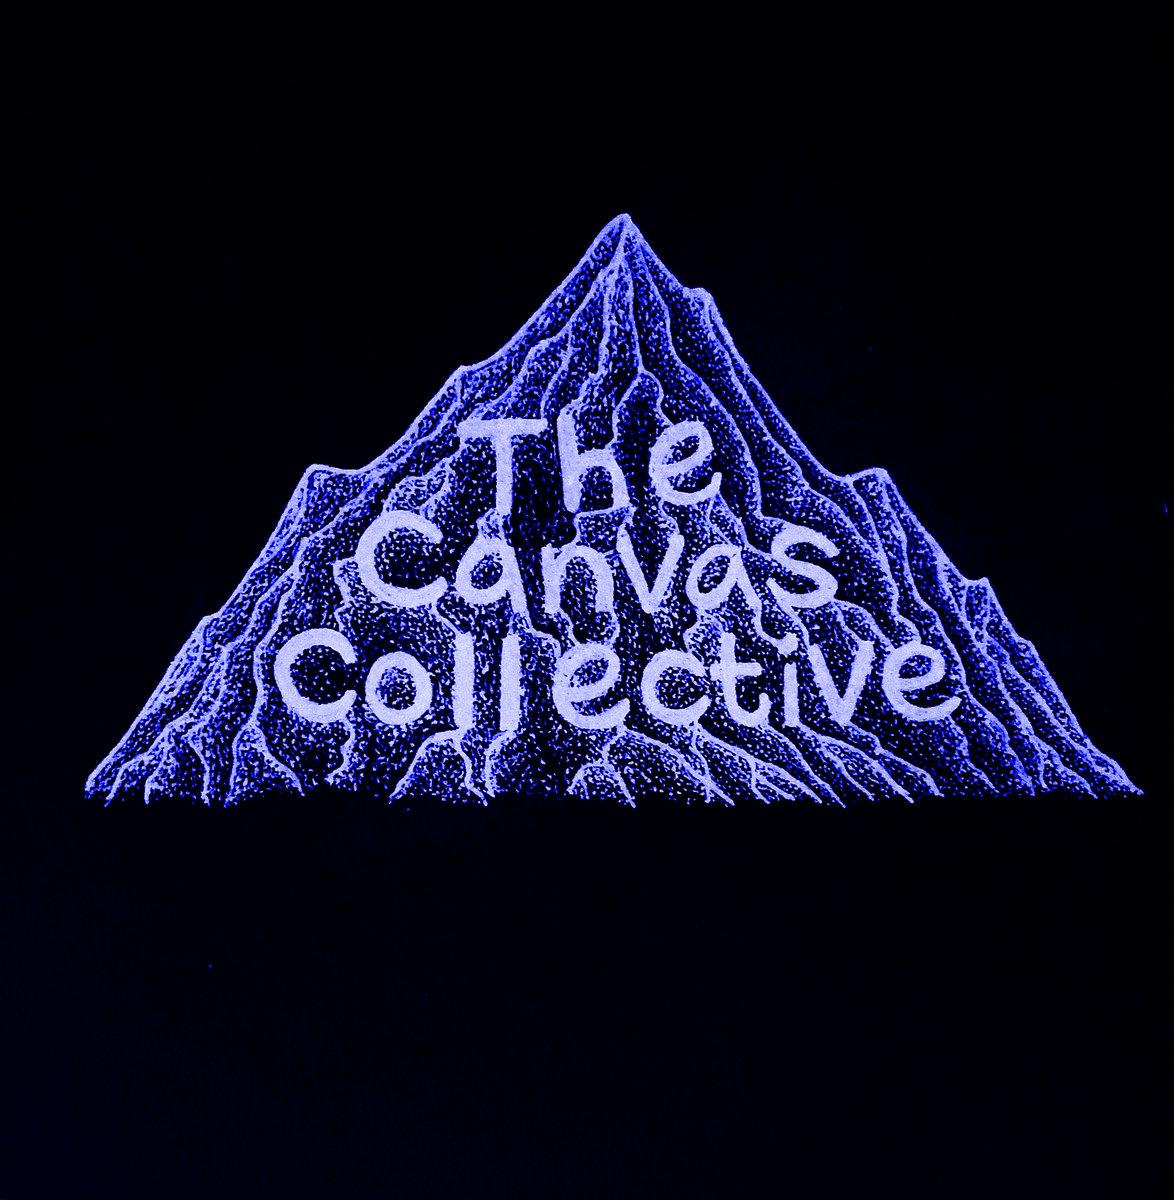 The Canvas Collective